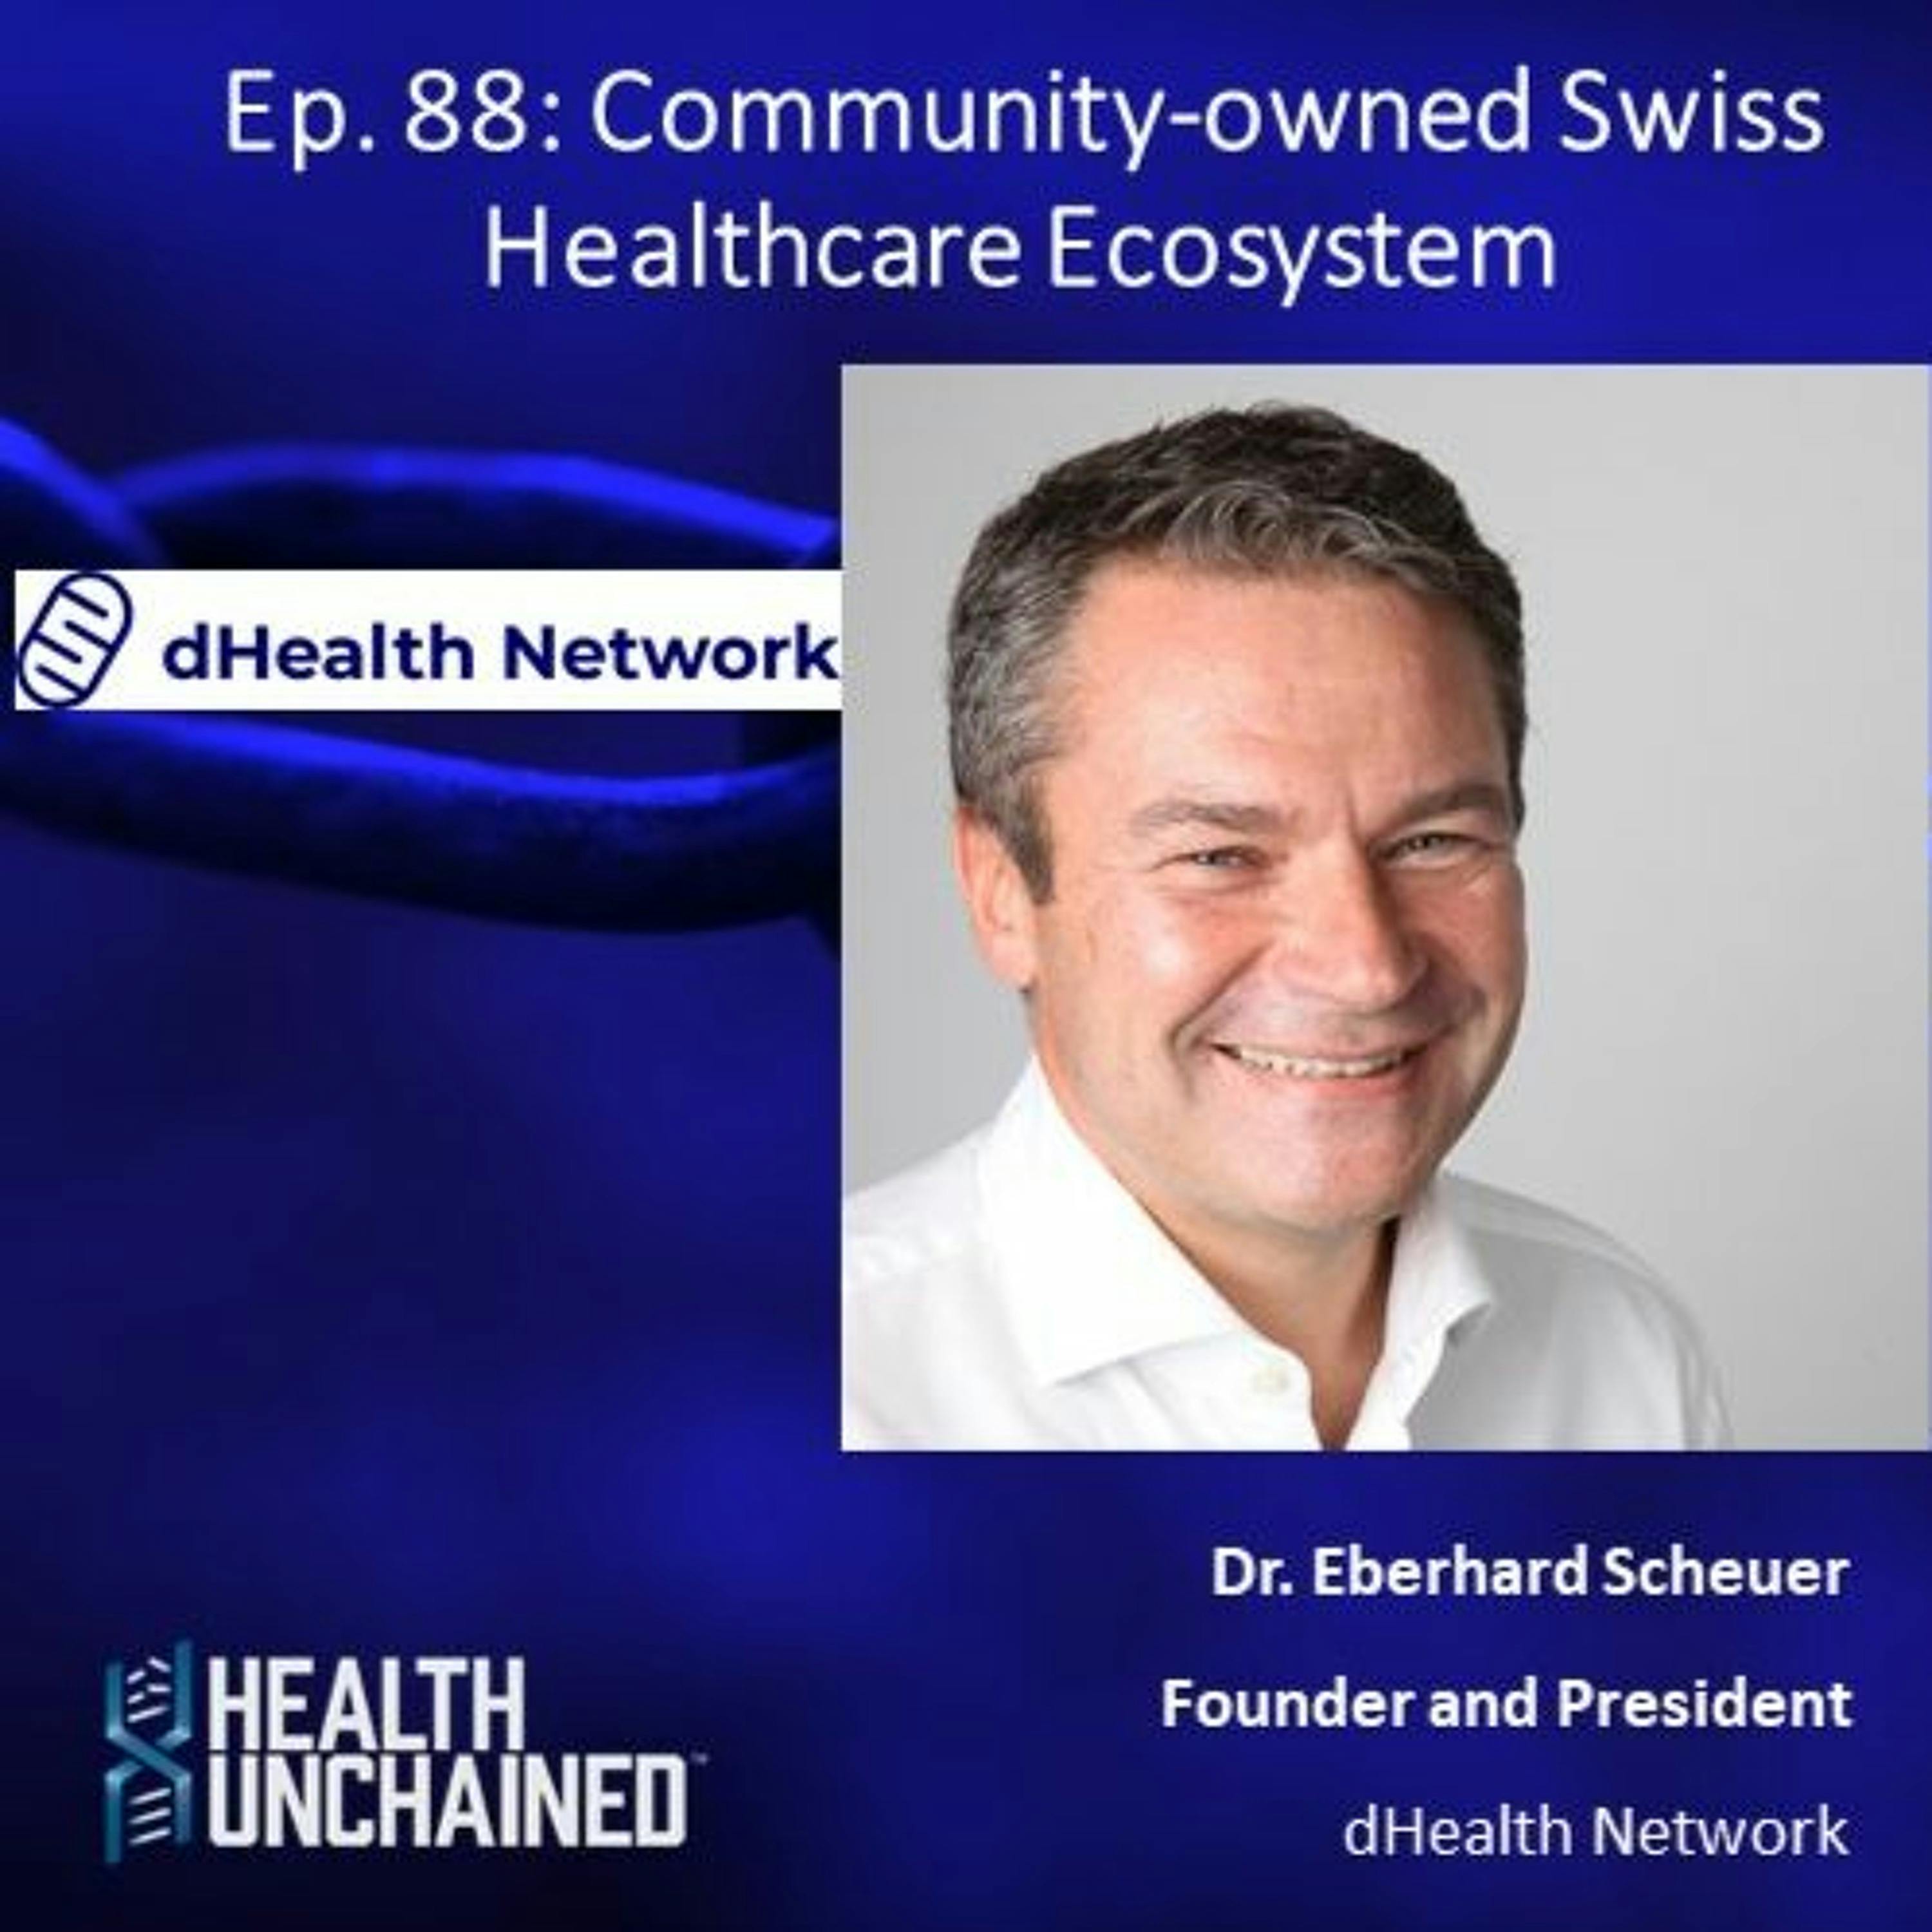 Ep. 88: Community-owned Swiss Healthcare Ecosystem – Eberhard Scheuer (President dHealth Network)